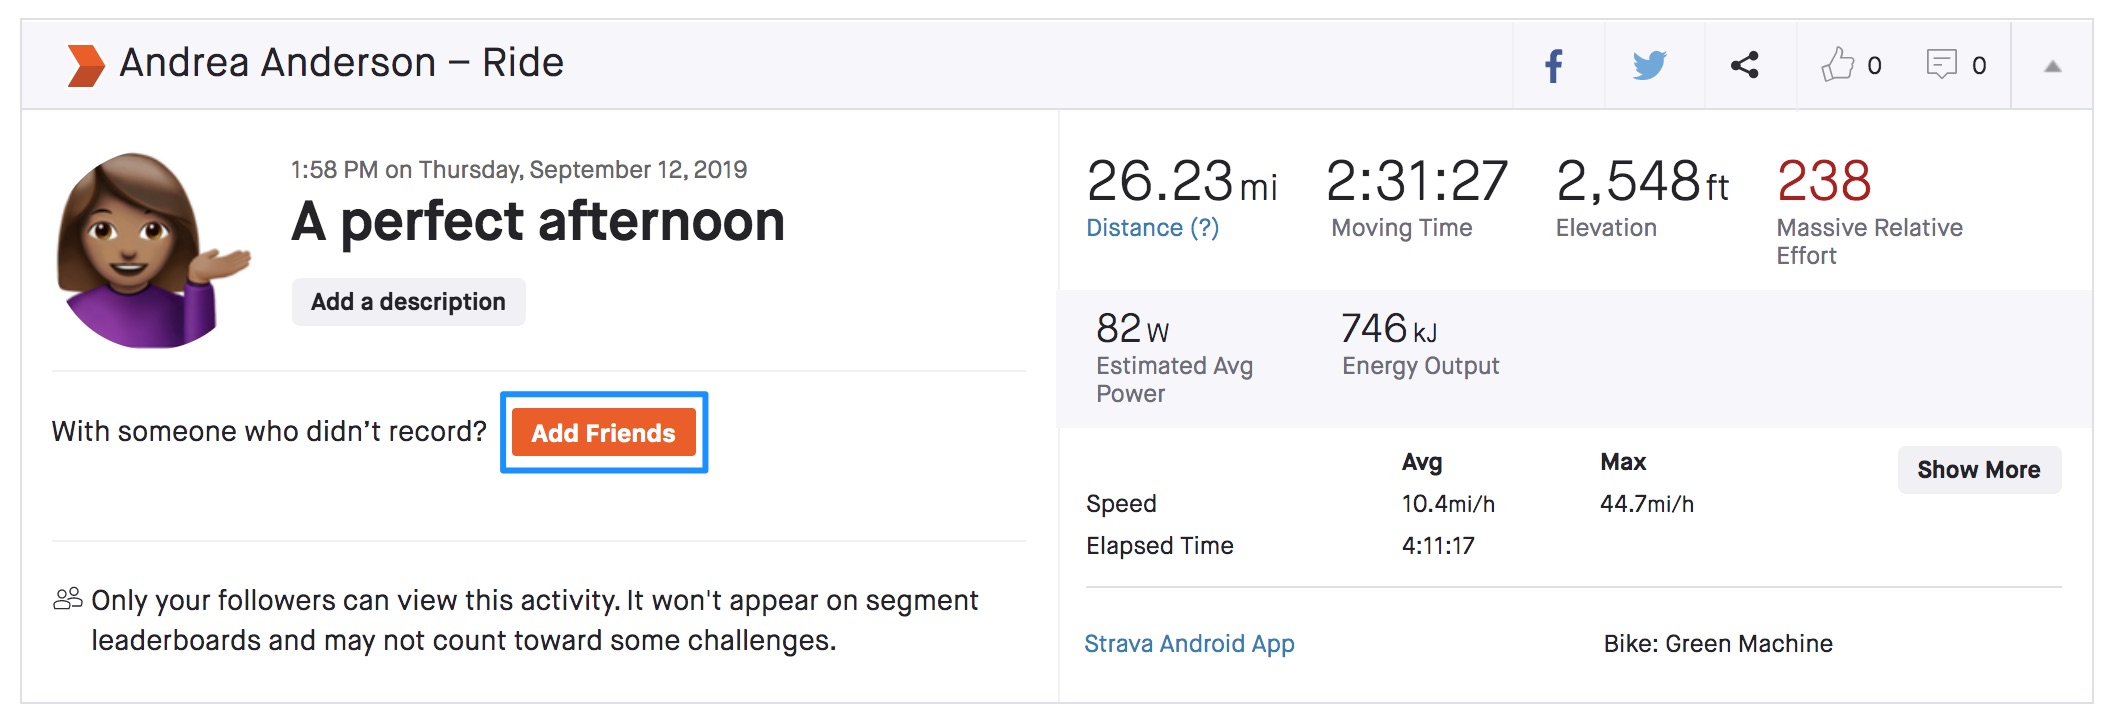 A_perfect_afternoon___Ride___Strava.jpg